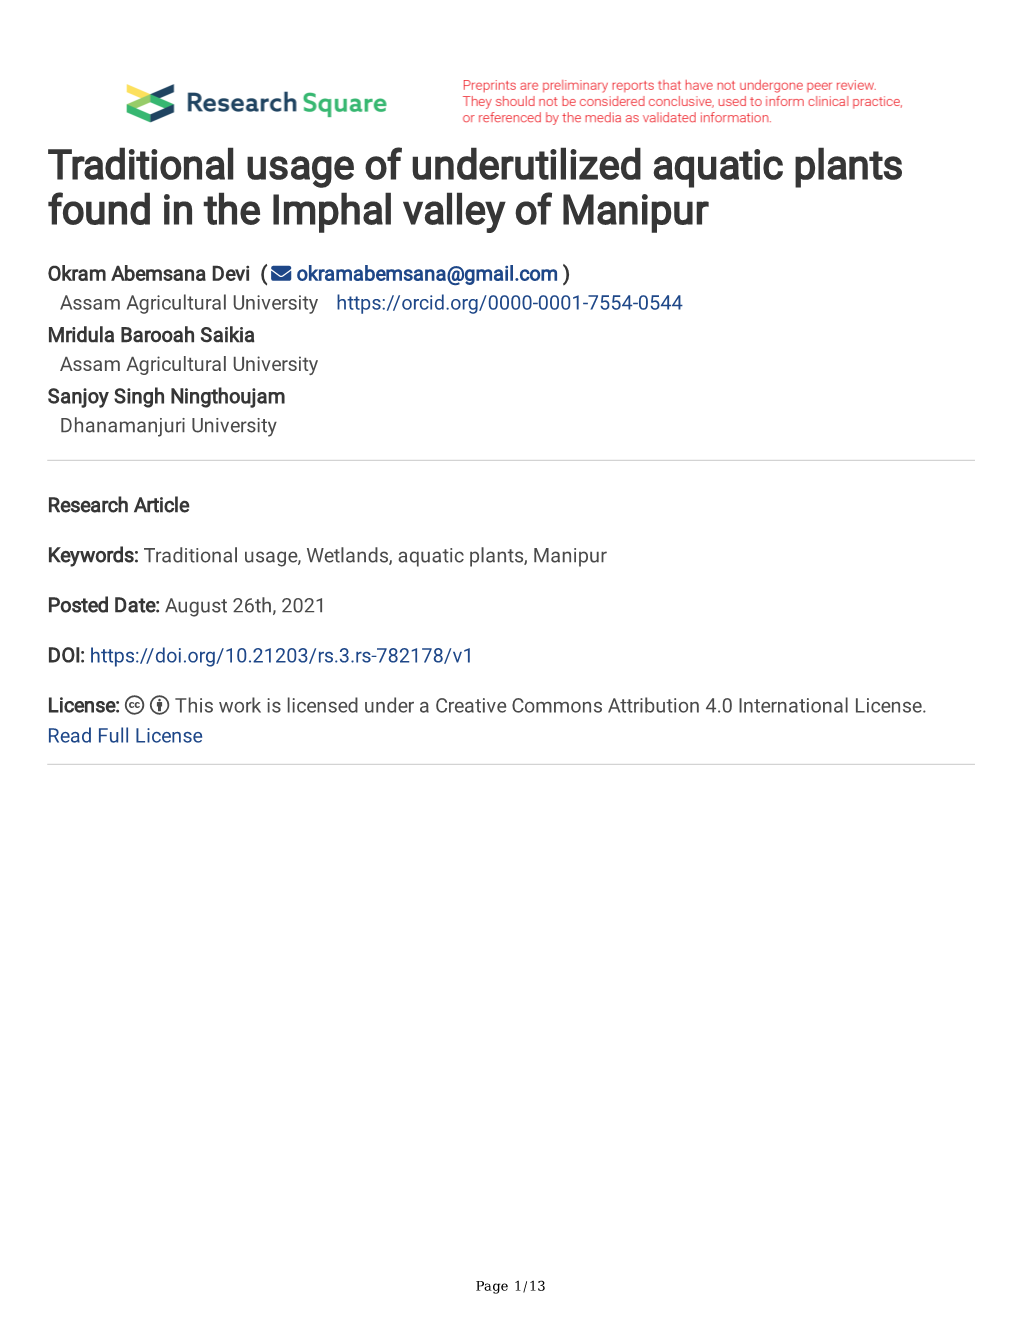 Traditional Usage of Underutilized Aquatic Plants Found in the Imphal Valley of Manipur